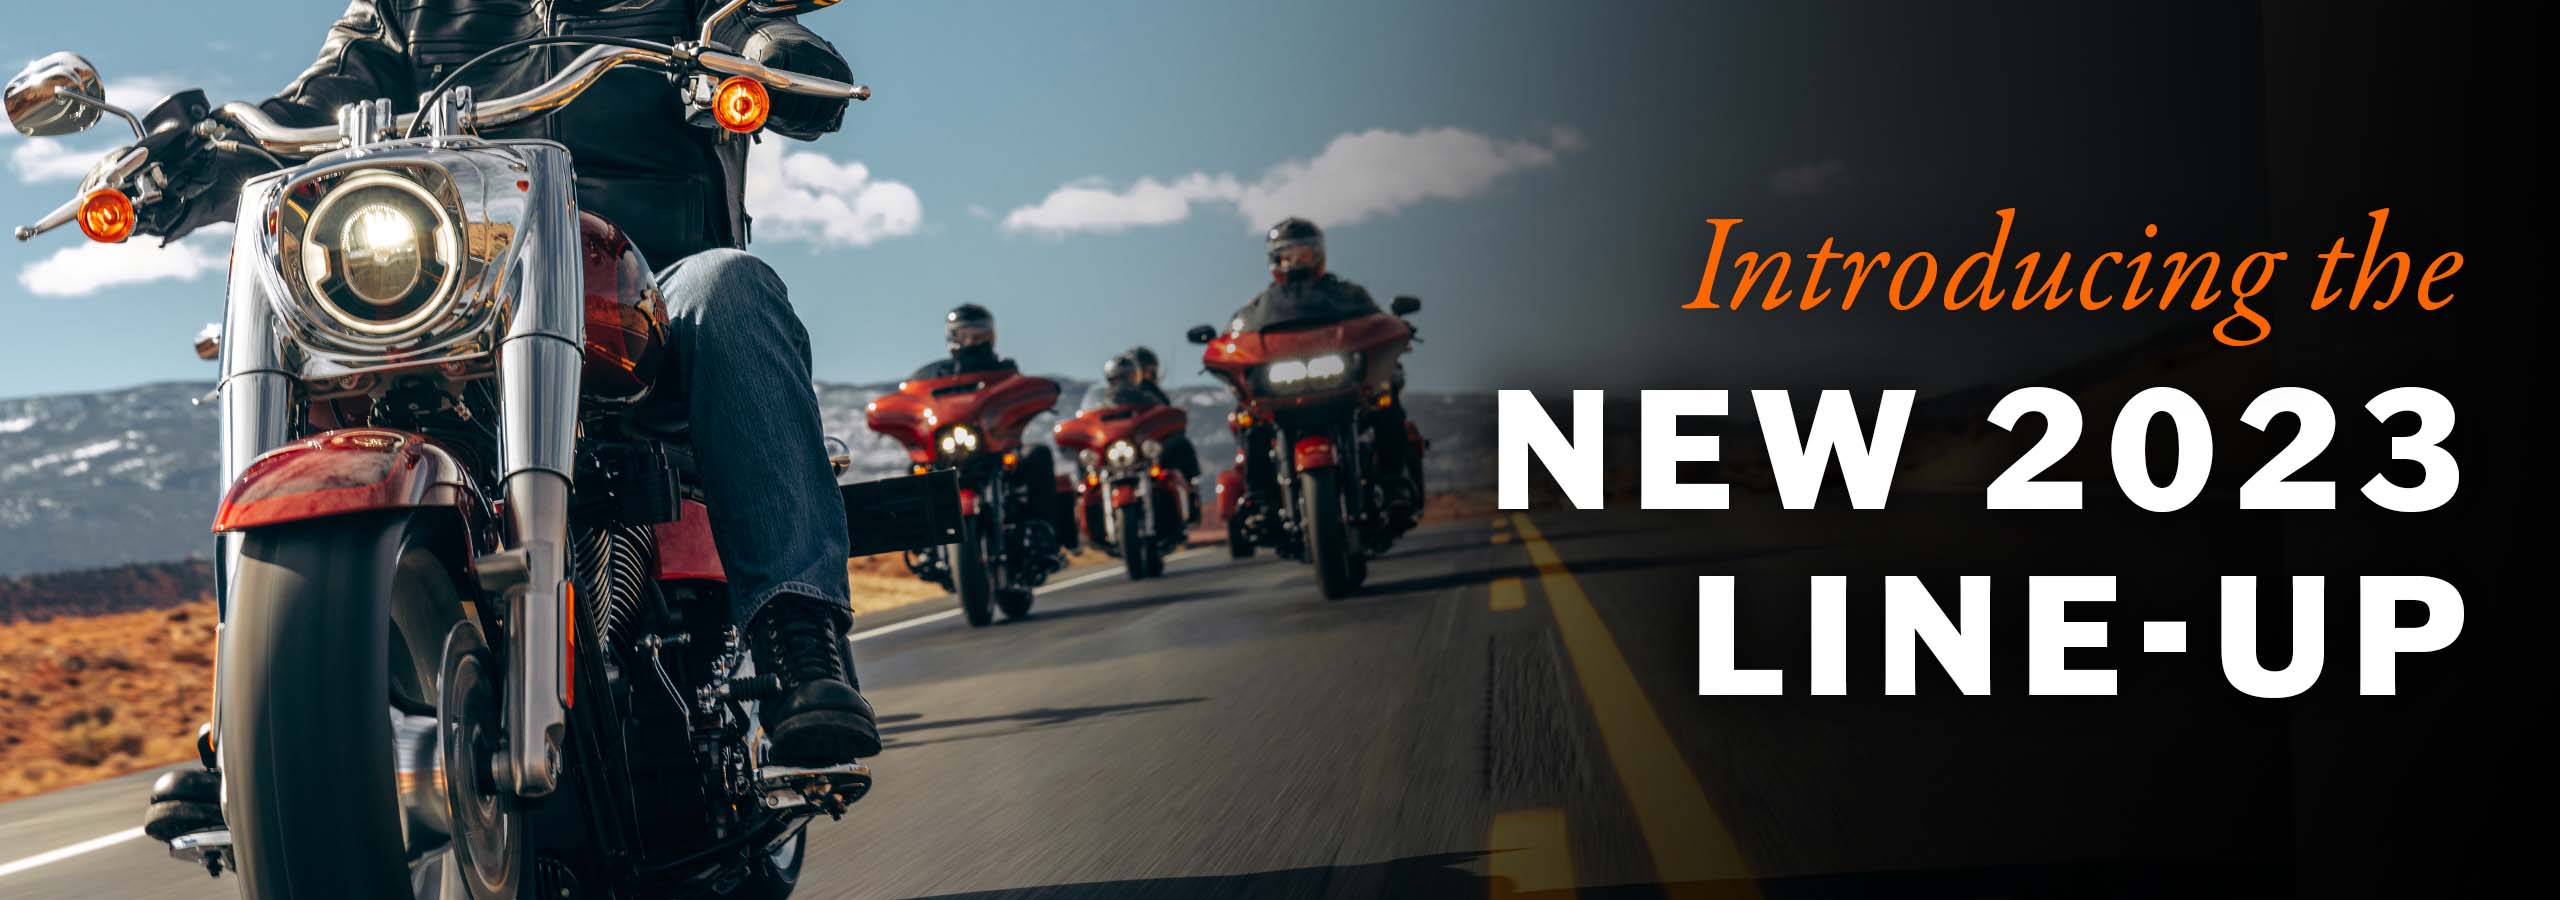 Order your brand new 2023 Harley-Davidson motorcycle from Maidstone Harley-Davidson today